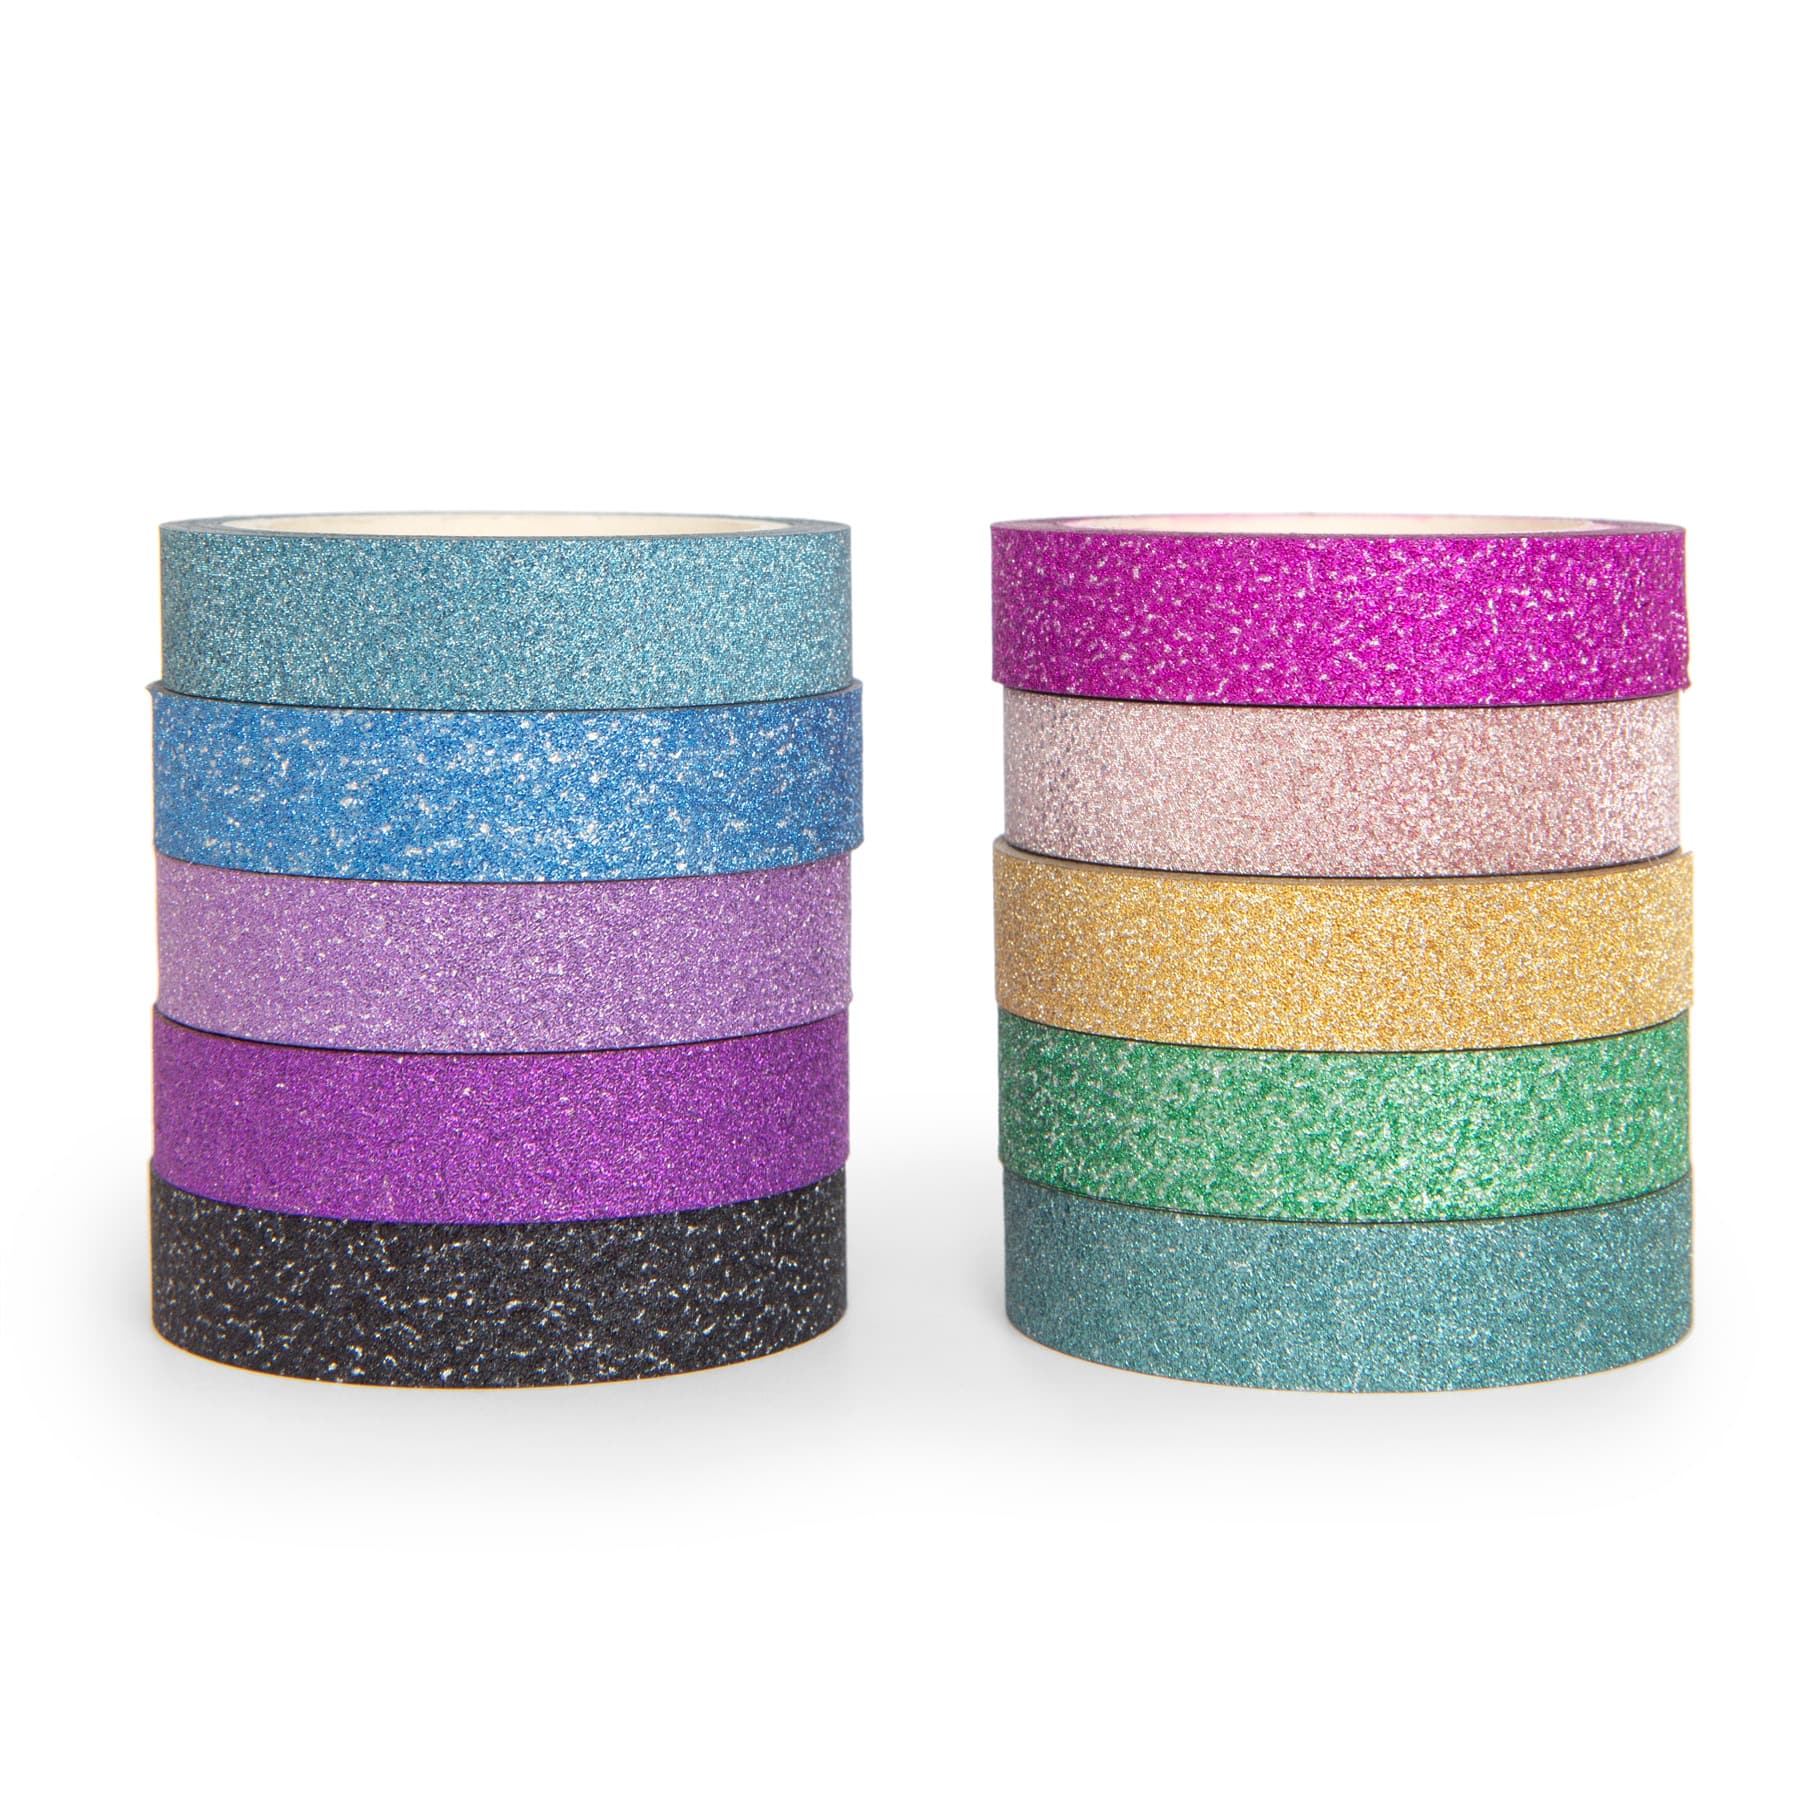 Pastel Glitter Crafting Tape & Dispenser Set by Recollections™